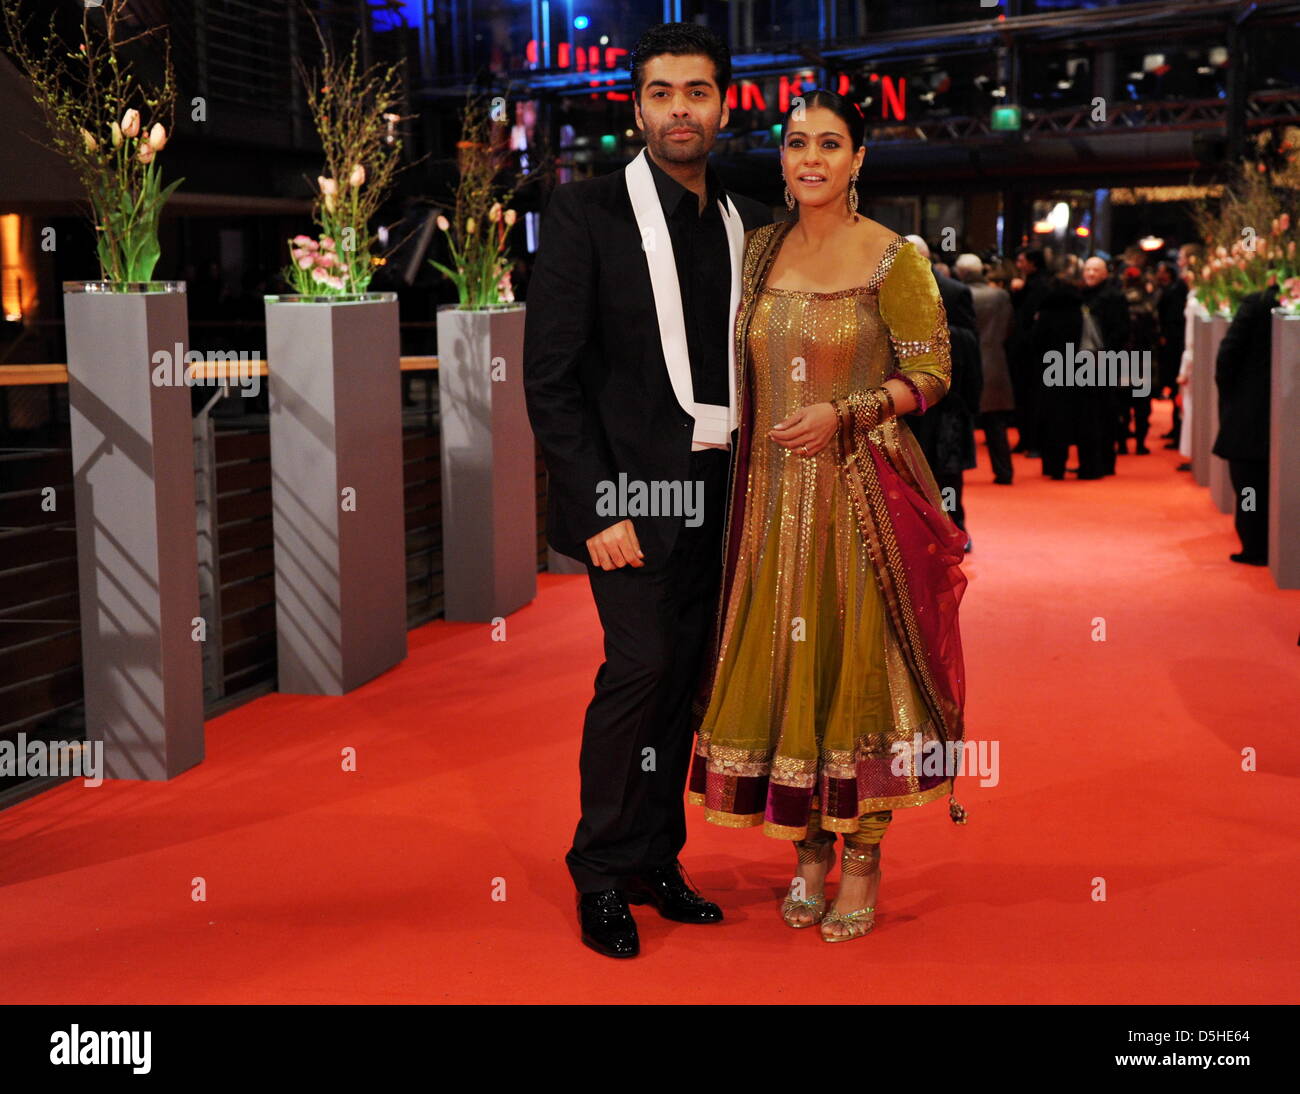 Indian actress Kajol Devgan and Indian director Karan Johar arrive for the premiere of the film 'My Name Is Khan' during the 60th Berlinale International Film Festival in Berlin, Germany, Friday 12 February 2010. Photo: Arno Burgi dpa/lbn Stock Photo